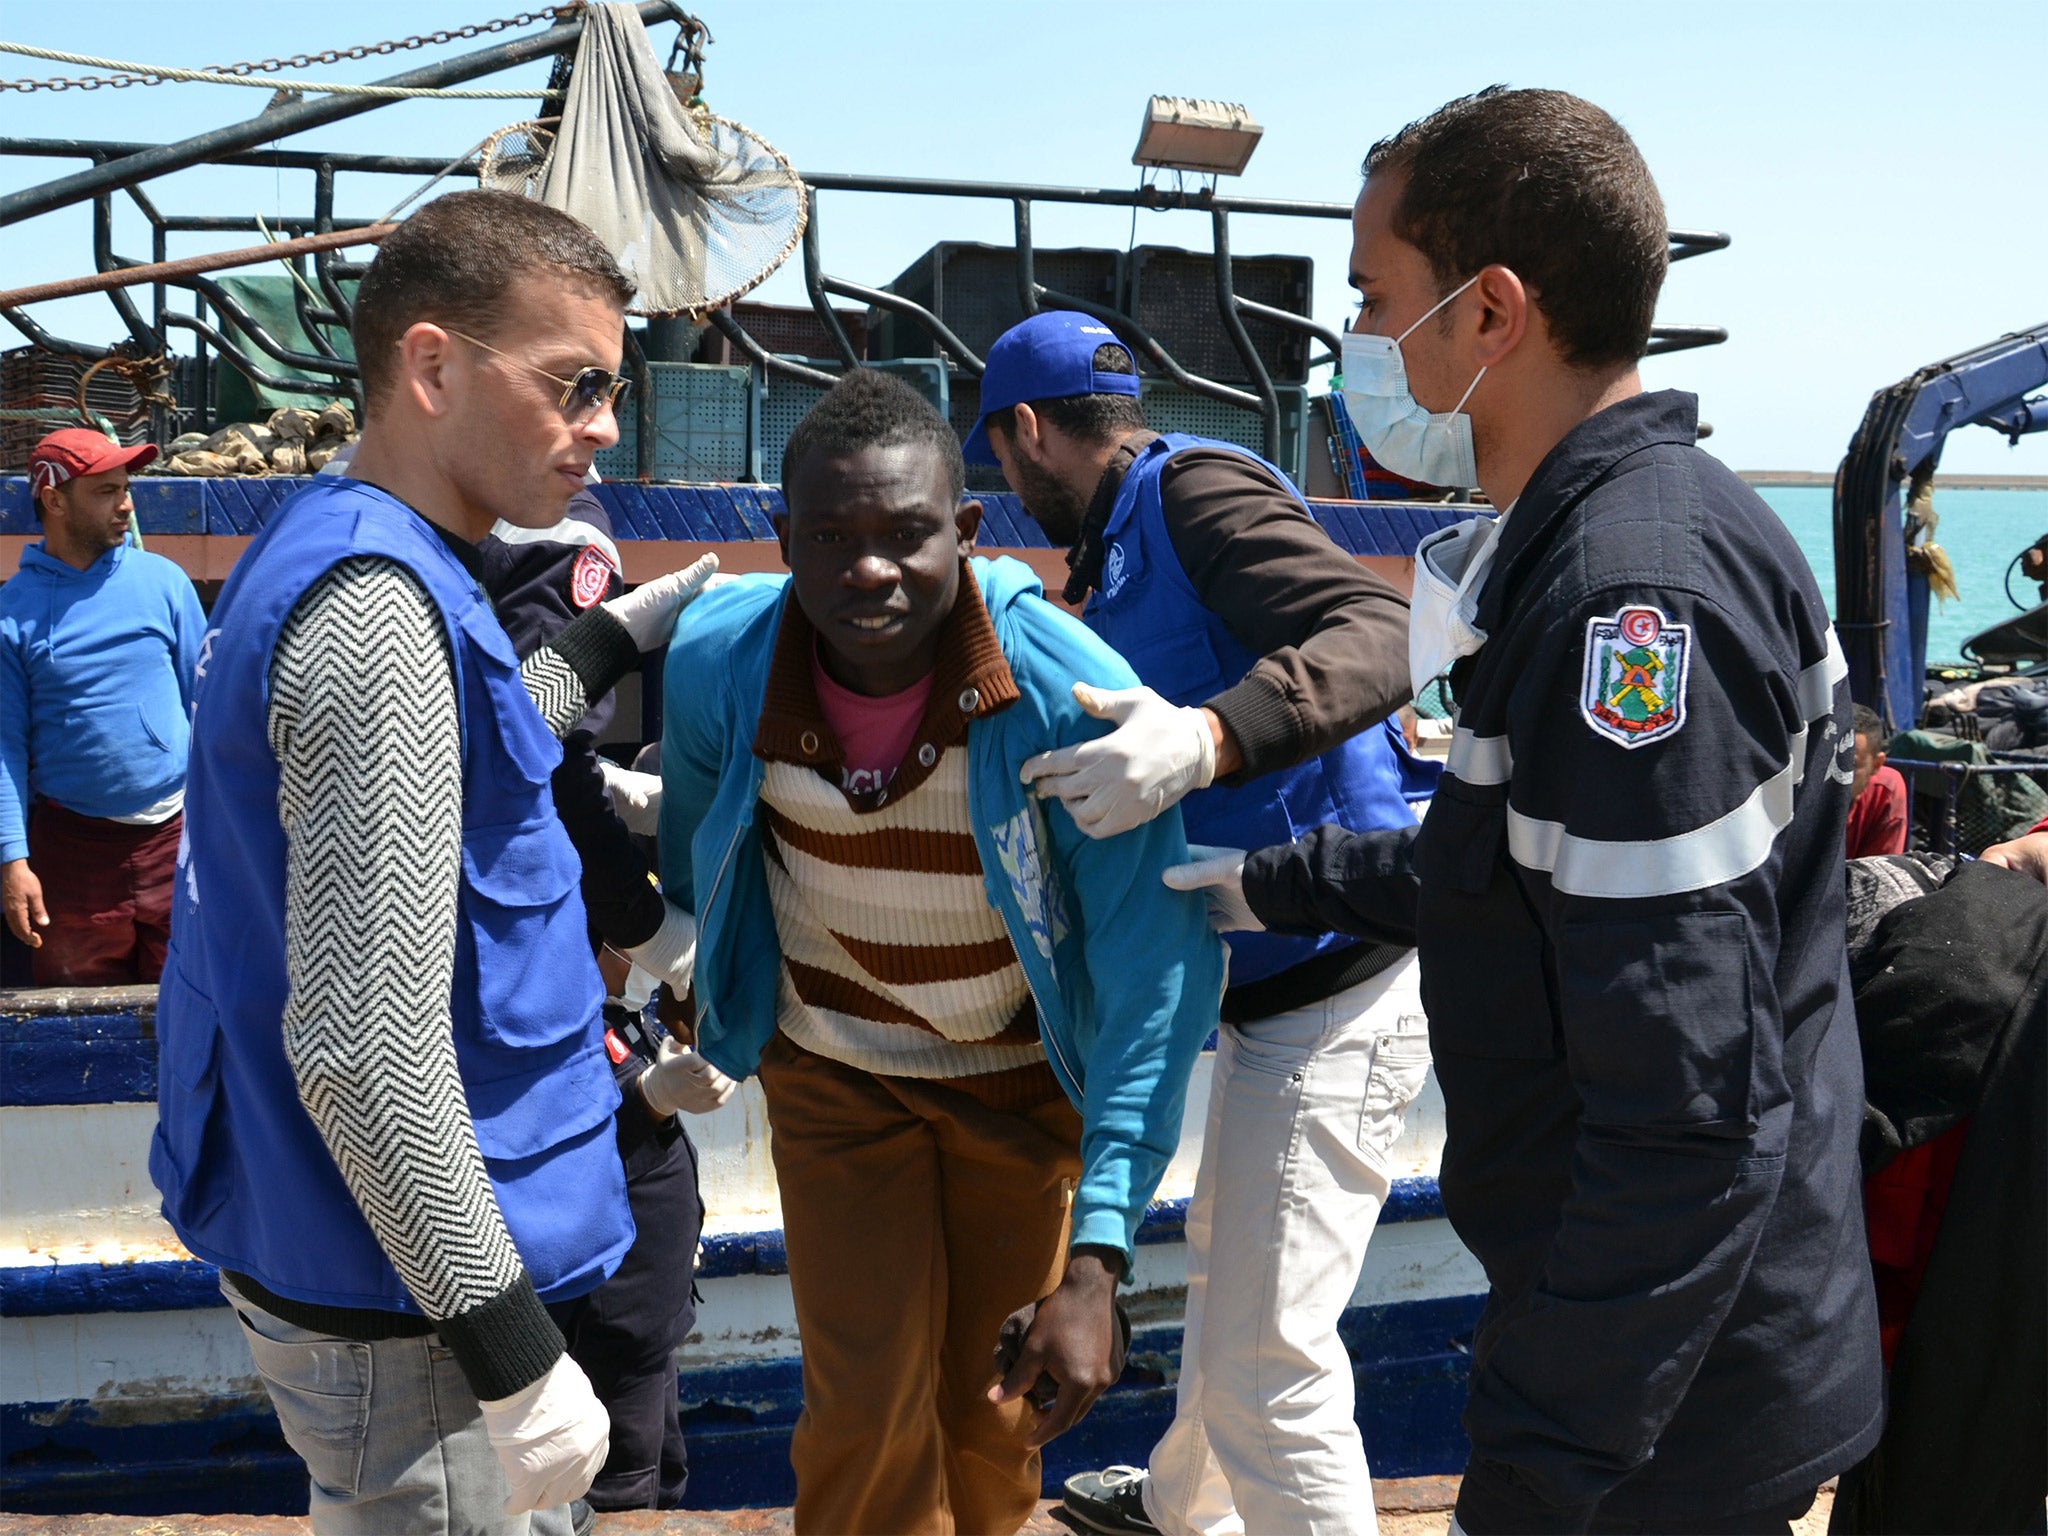 Migrants have told rescue workers how African migrants are often forced below deck while Middle Eastern passengers go on top